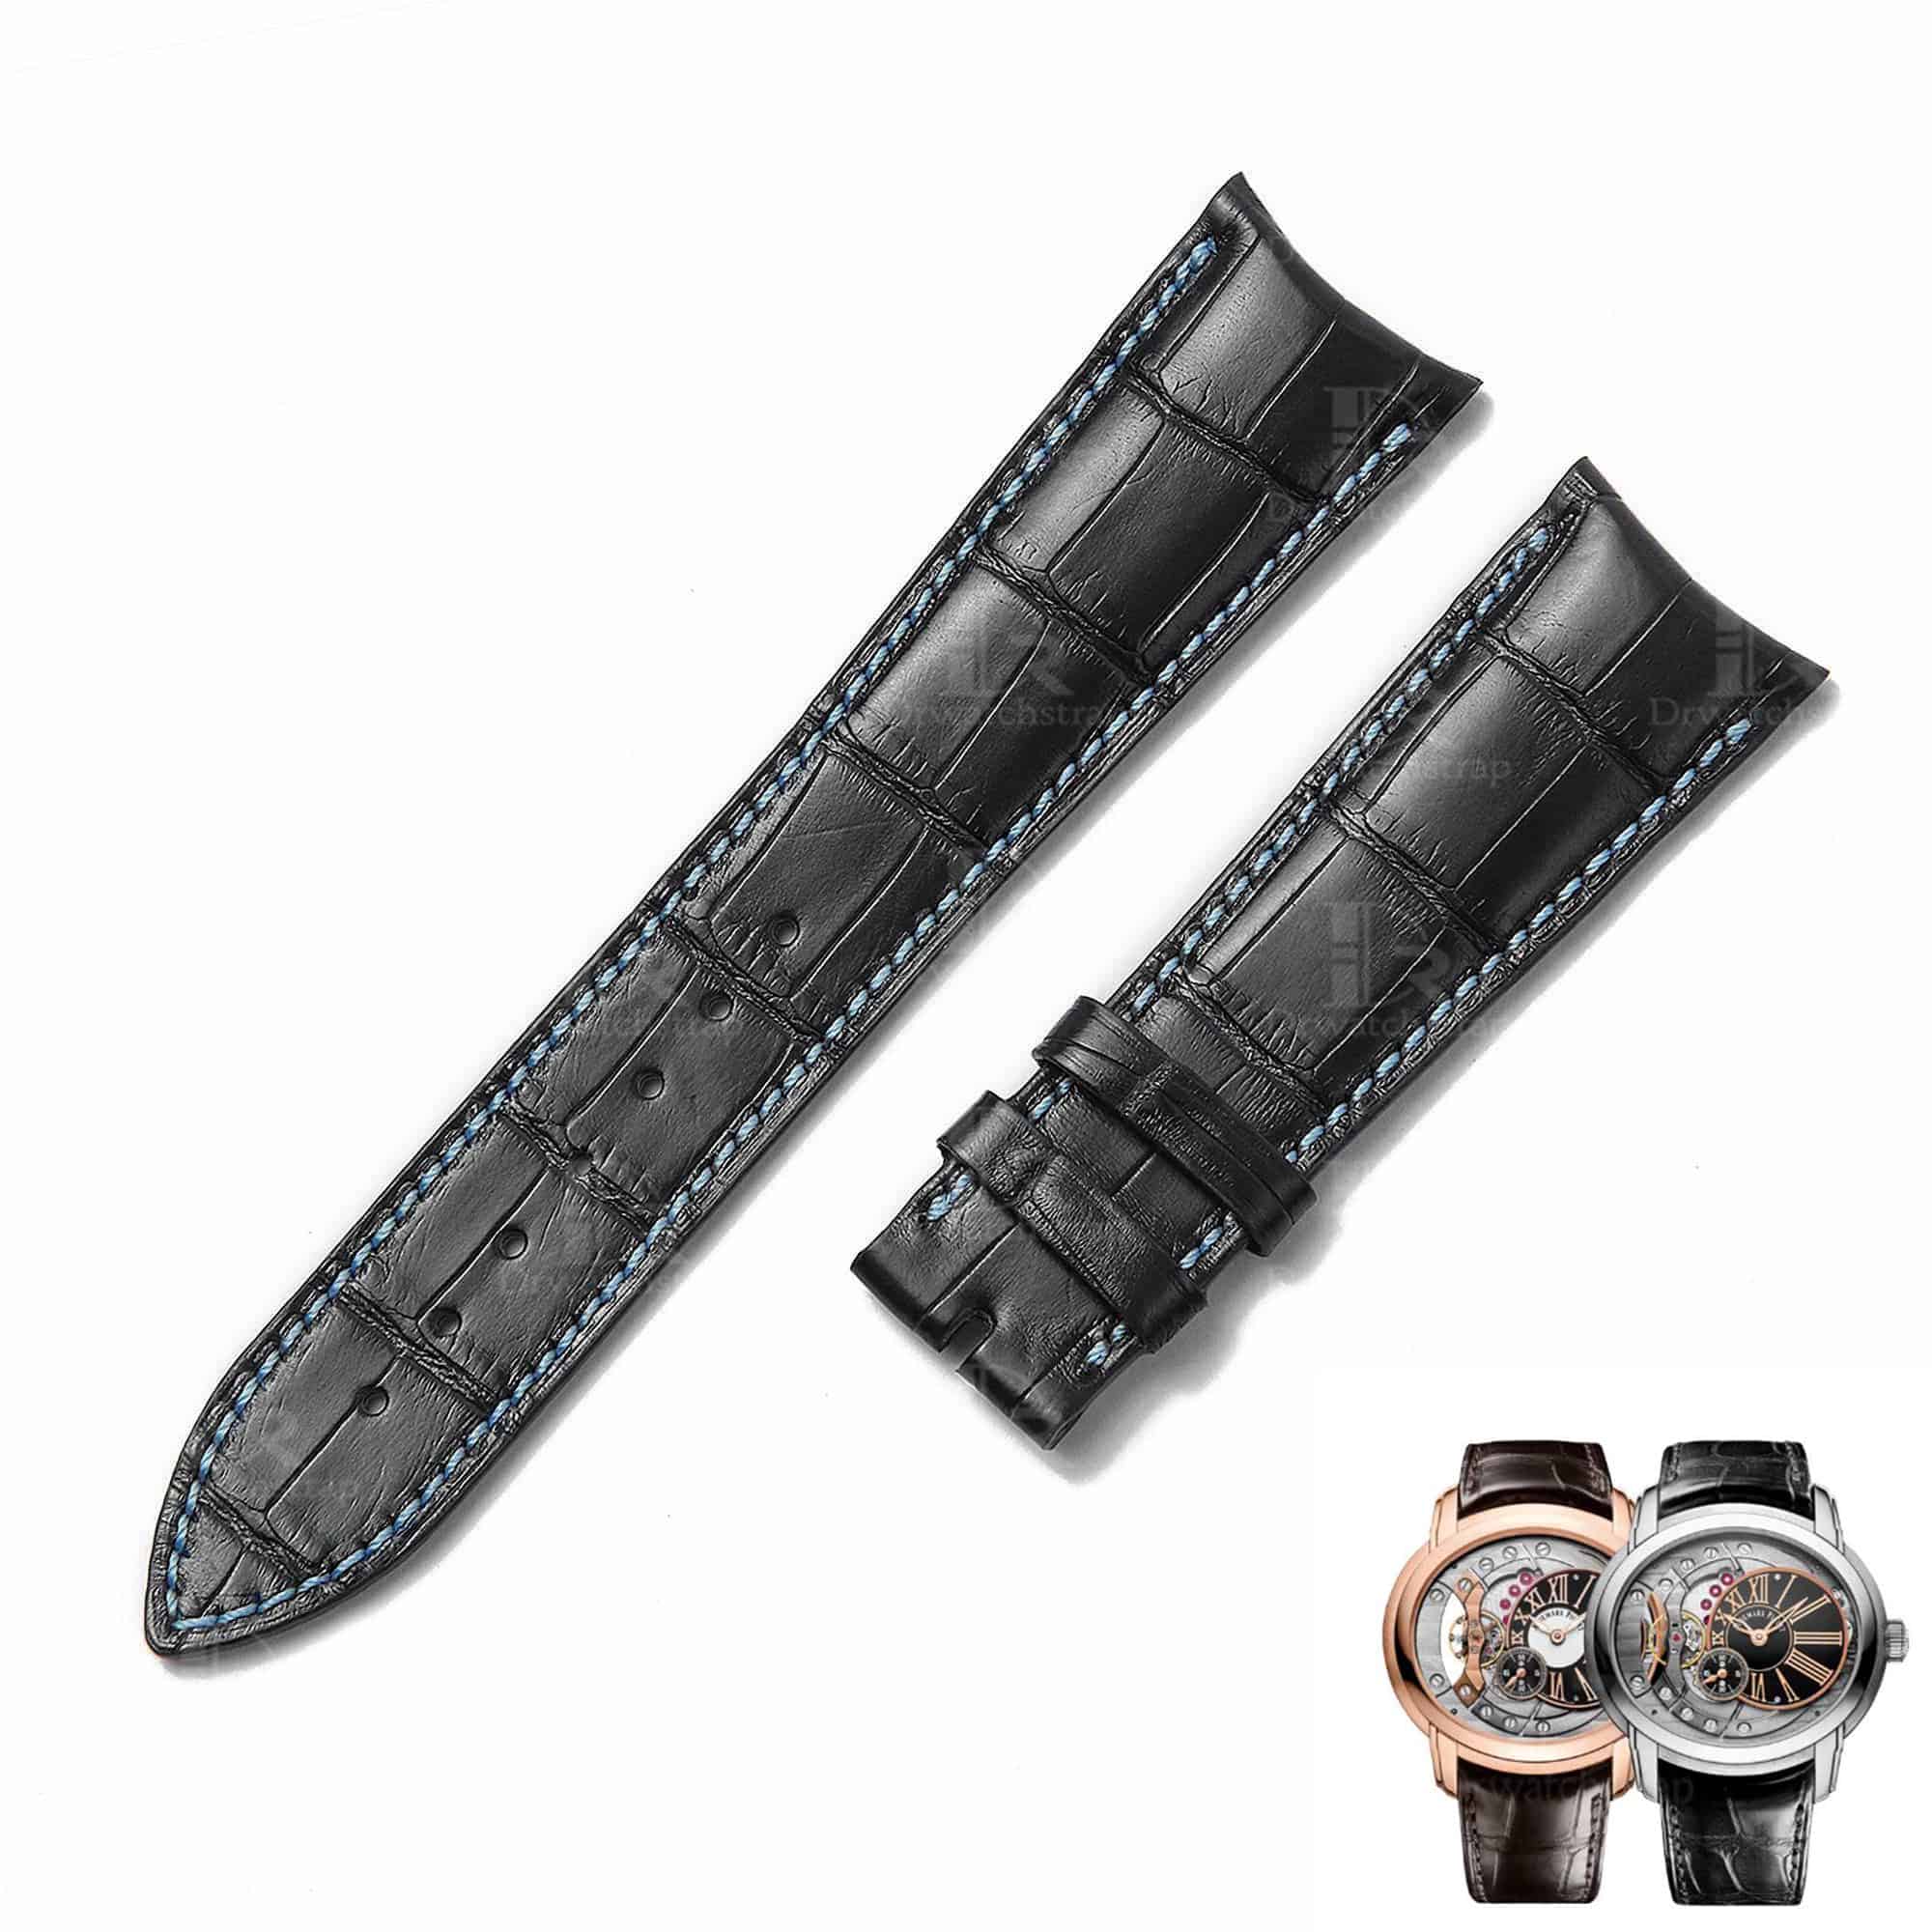 Custom alligator crocodile curved end links Audemars Piguet leather strap replacement Black bands with multi colors and sizes online for sale 20mm 22mm 24mm